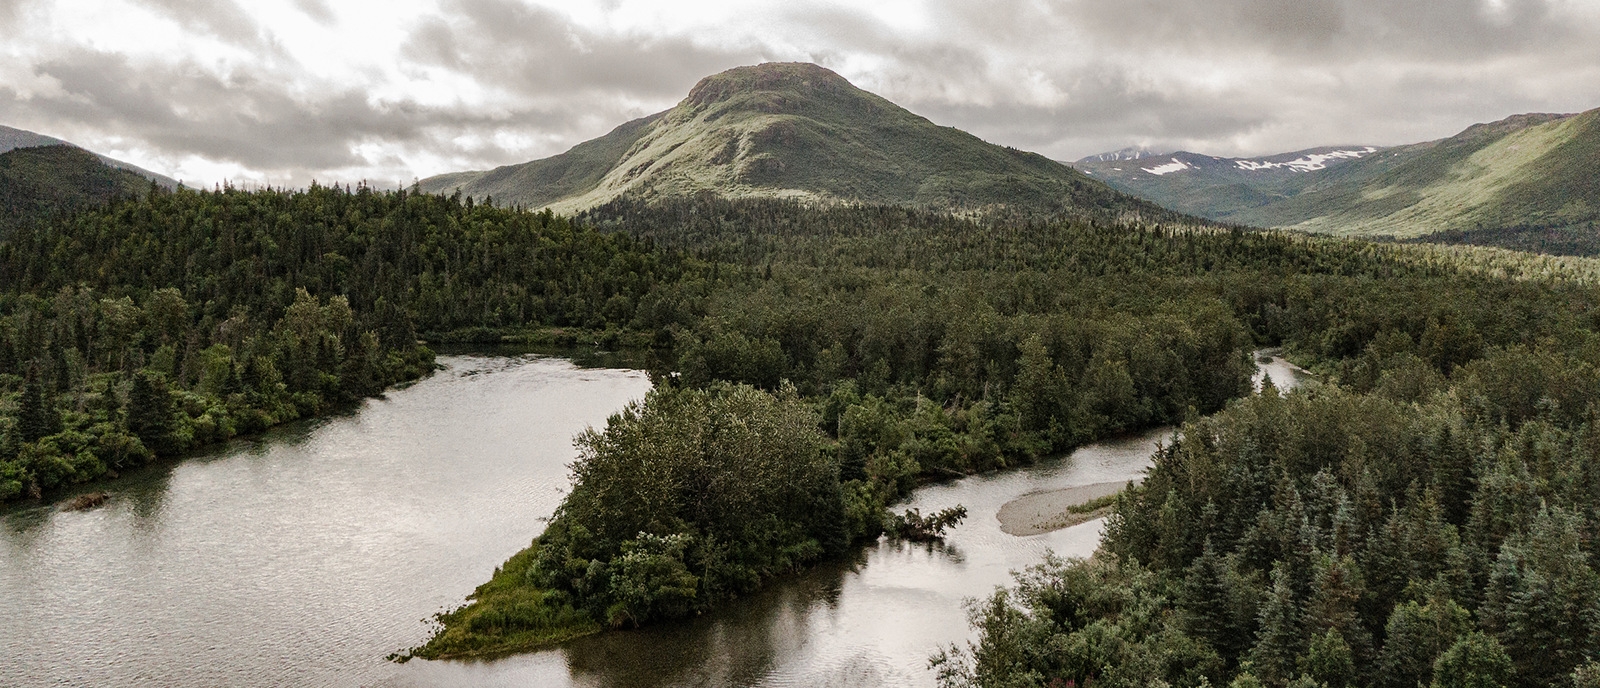 Conserved: 44,000 Acres of Critical Bristol Bay Watersheds